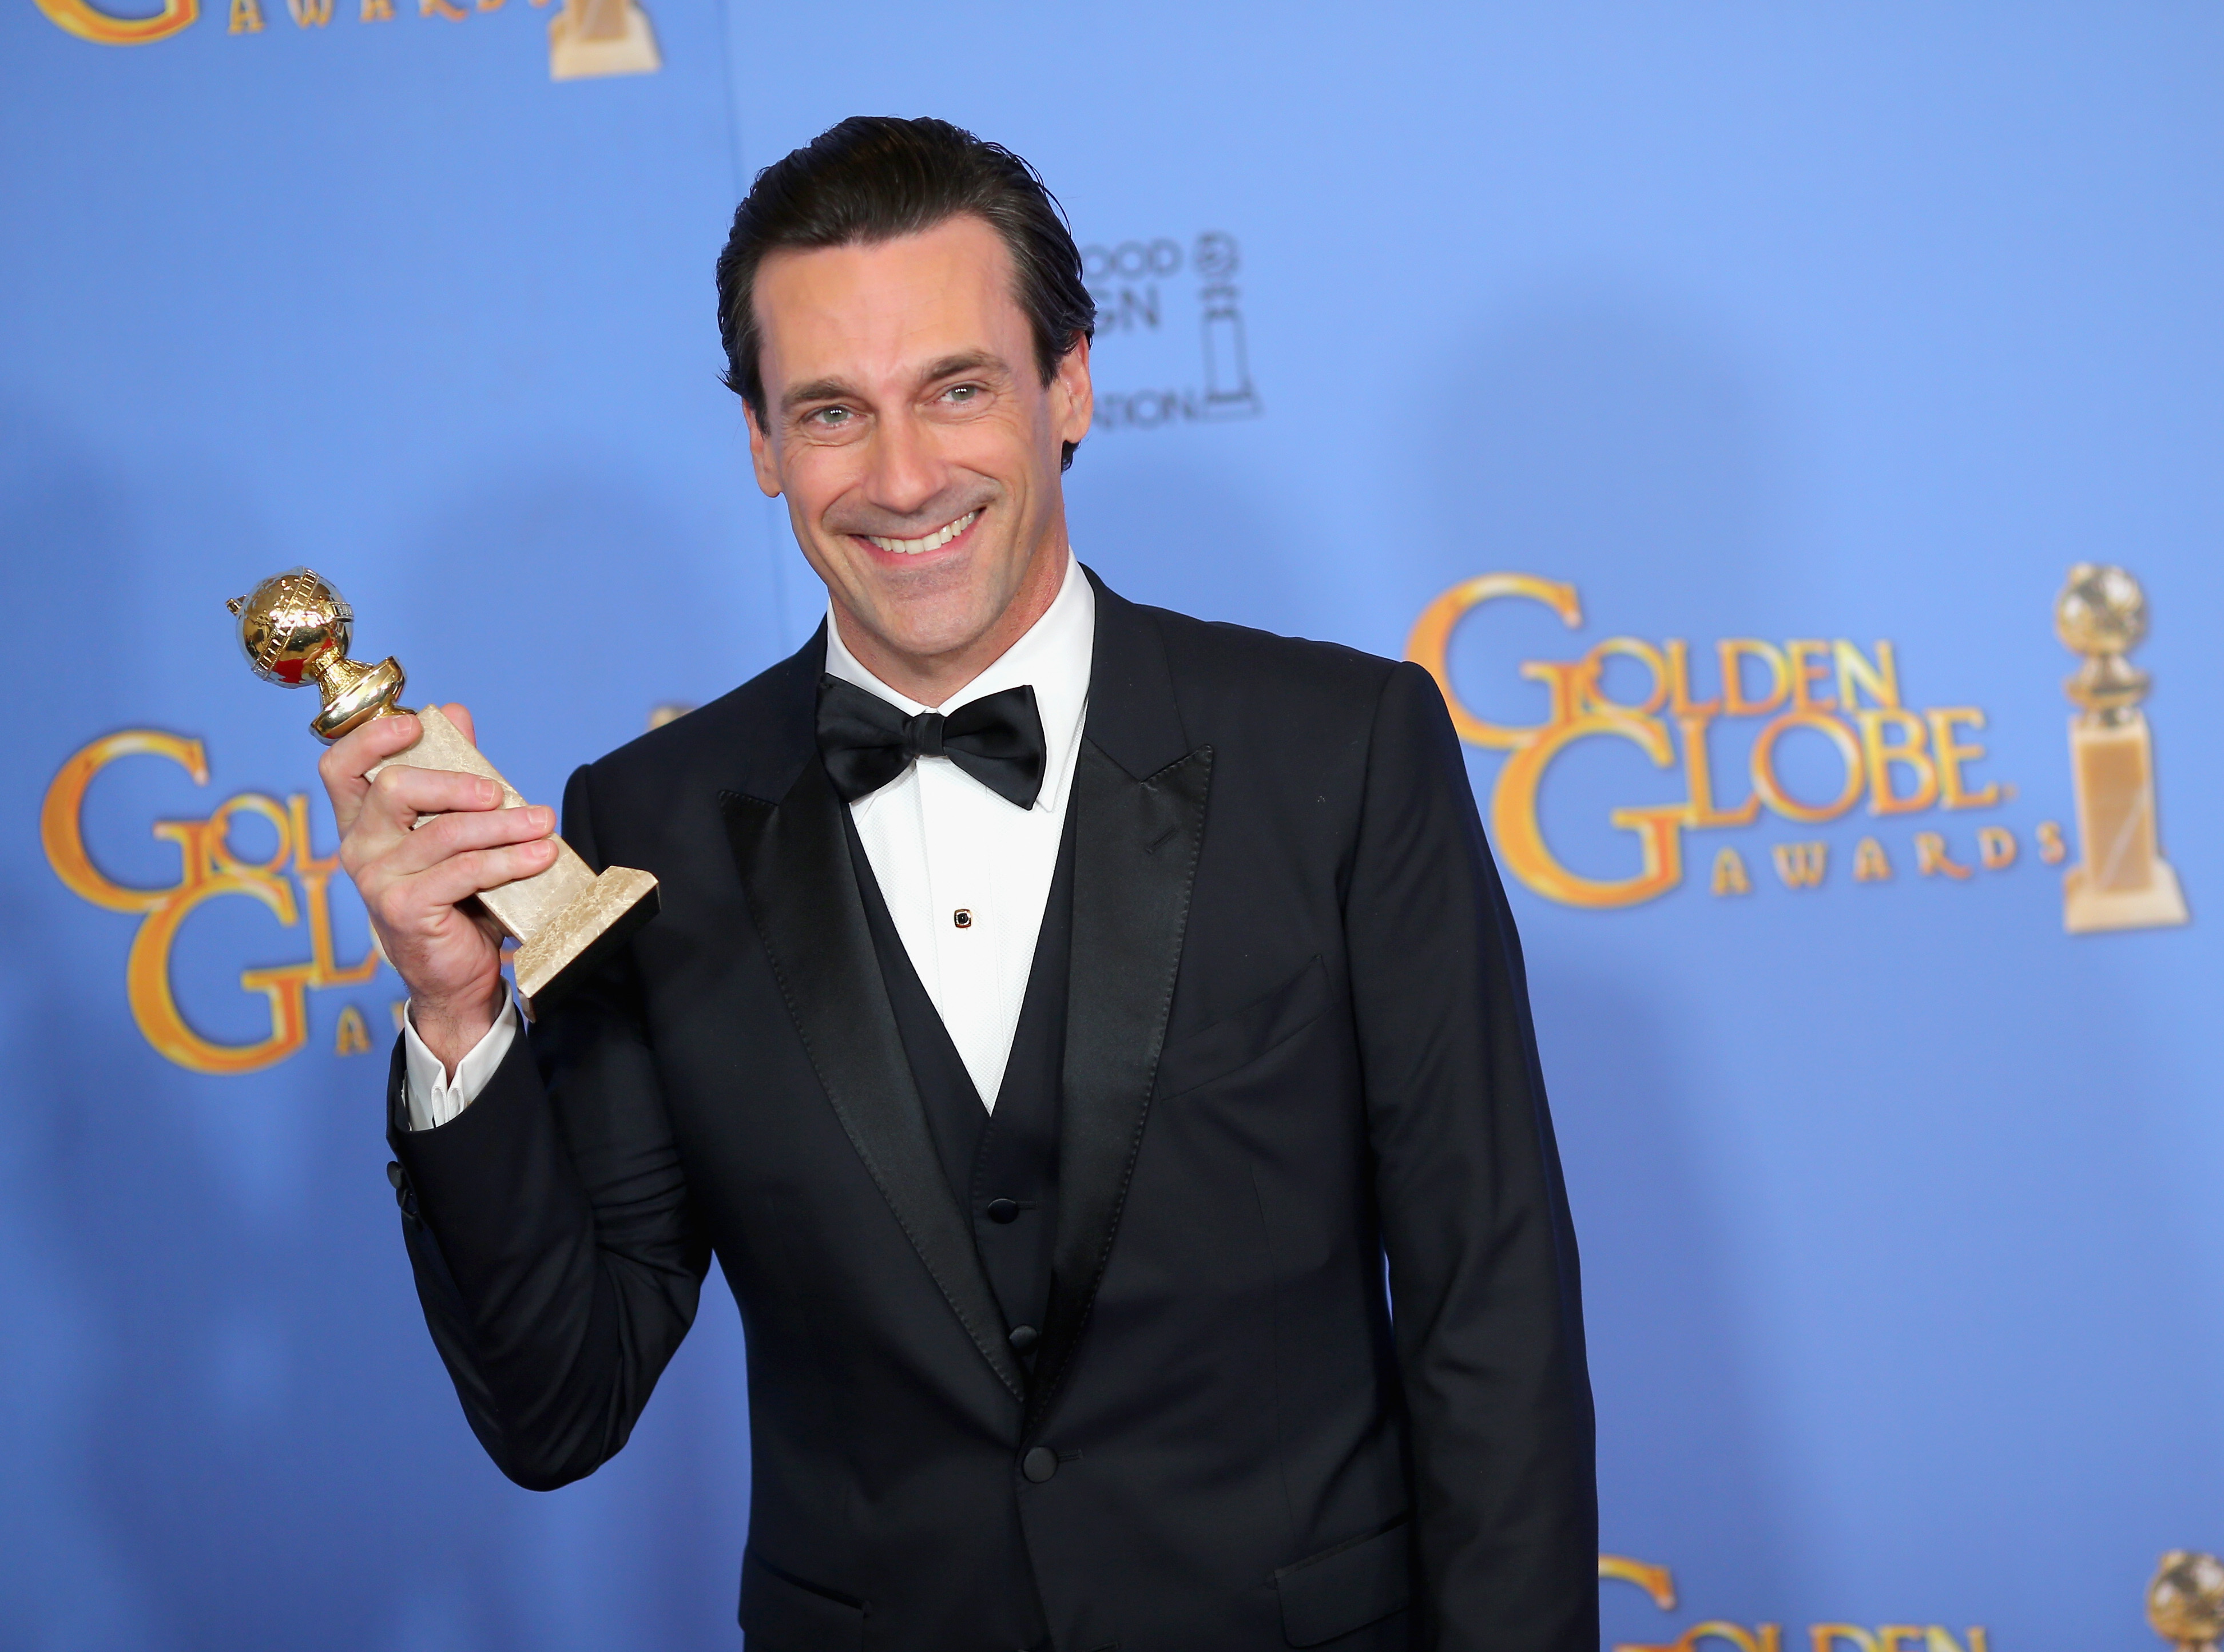 Actor Jon Hamm winner of Best Performance by an Actor In A Television Series - Drama, poses in the press room during the 73rd Annual Golden Globe Awards held at the Beverly Hilton Hotel on January 10, 2016 in Beverly Hills, California. (Mark Davis—Getty Images)